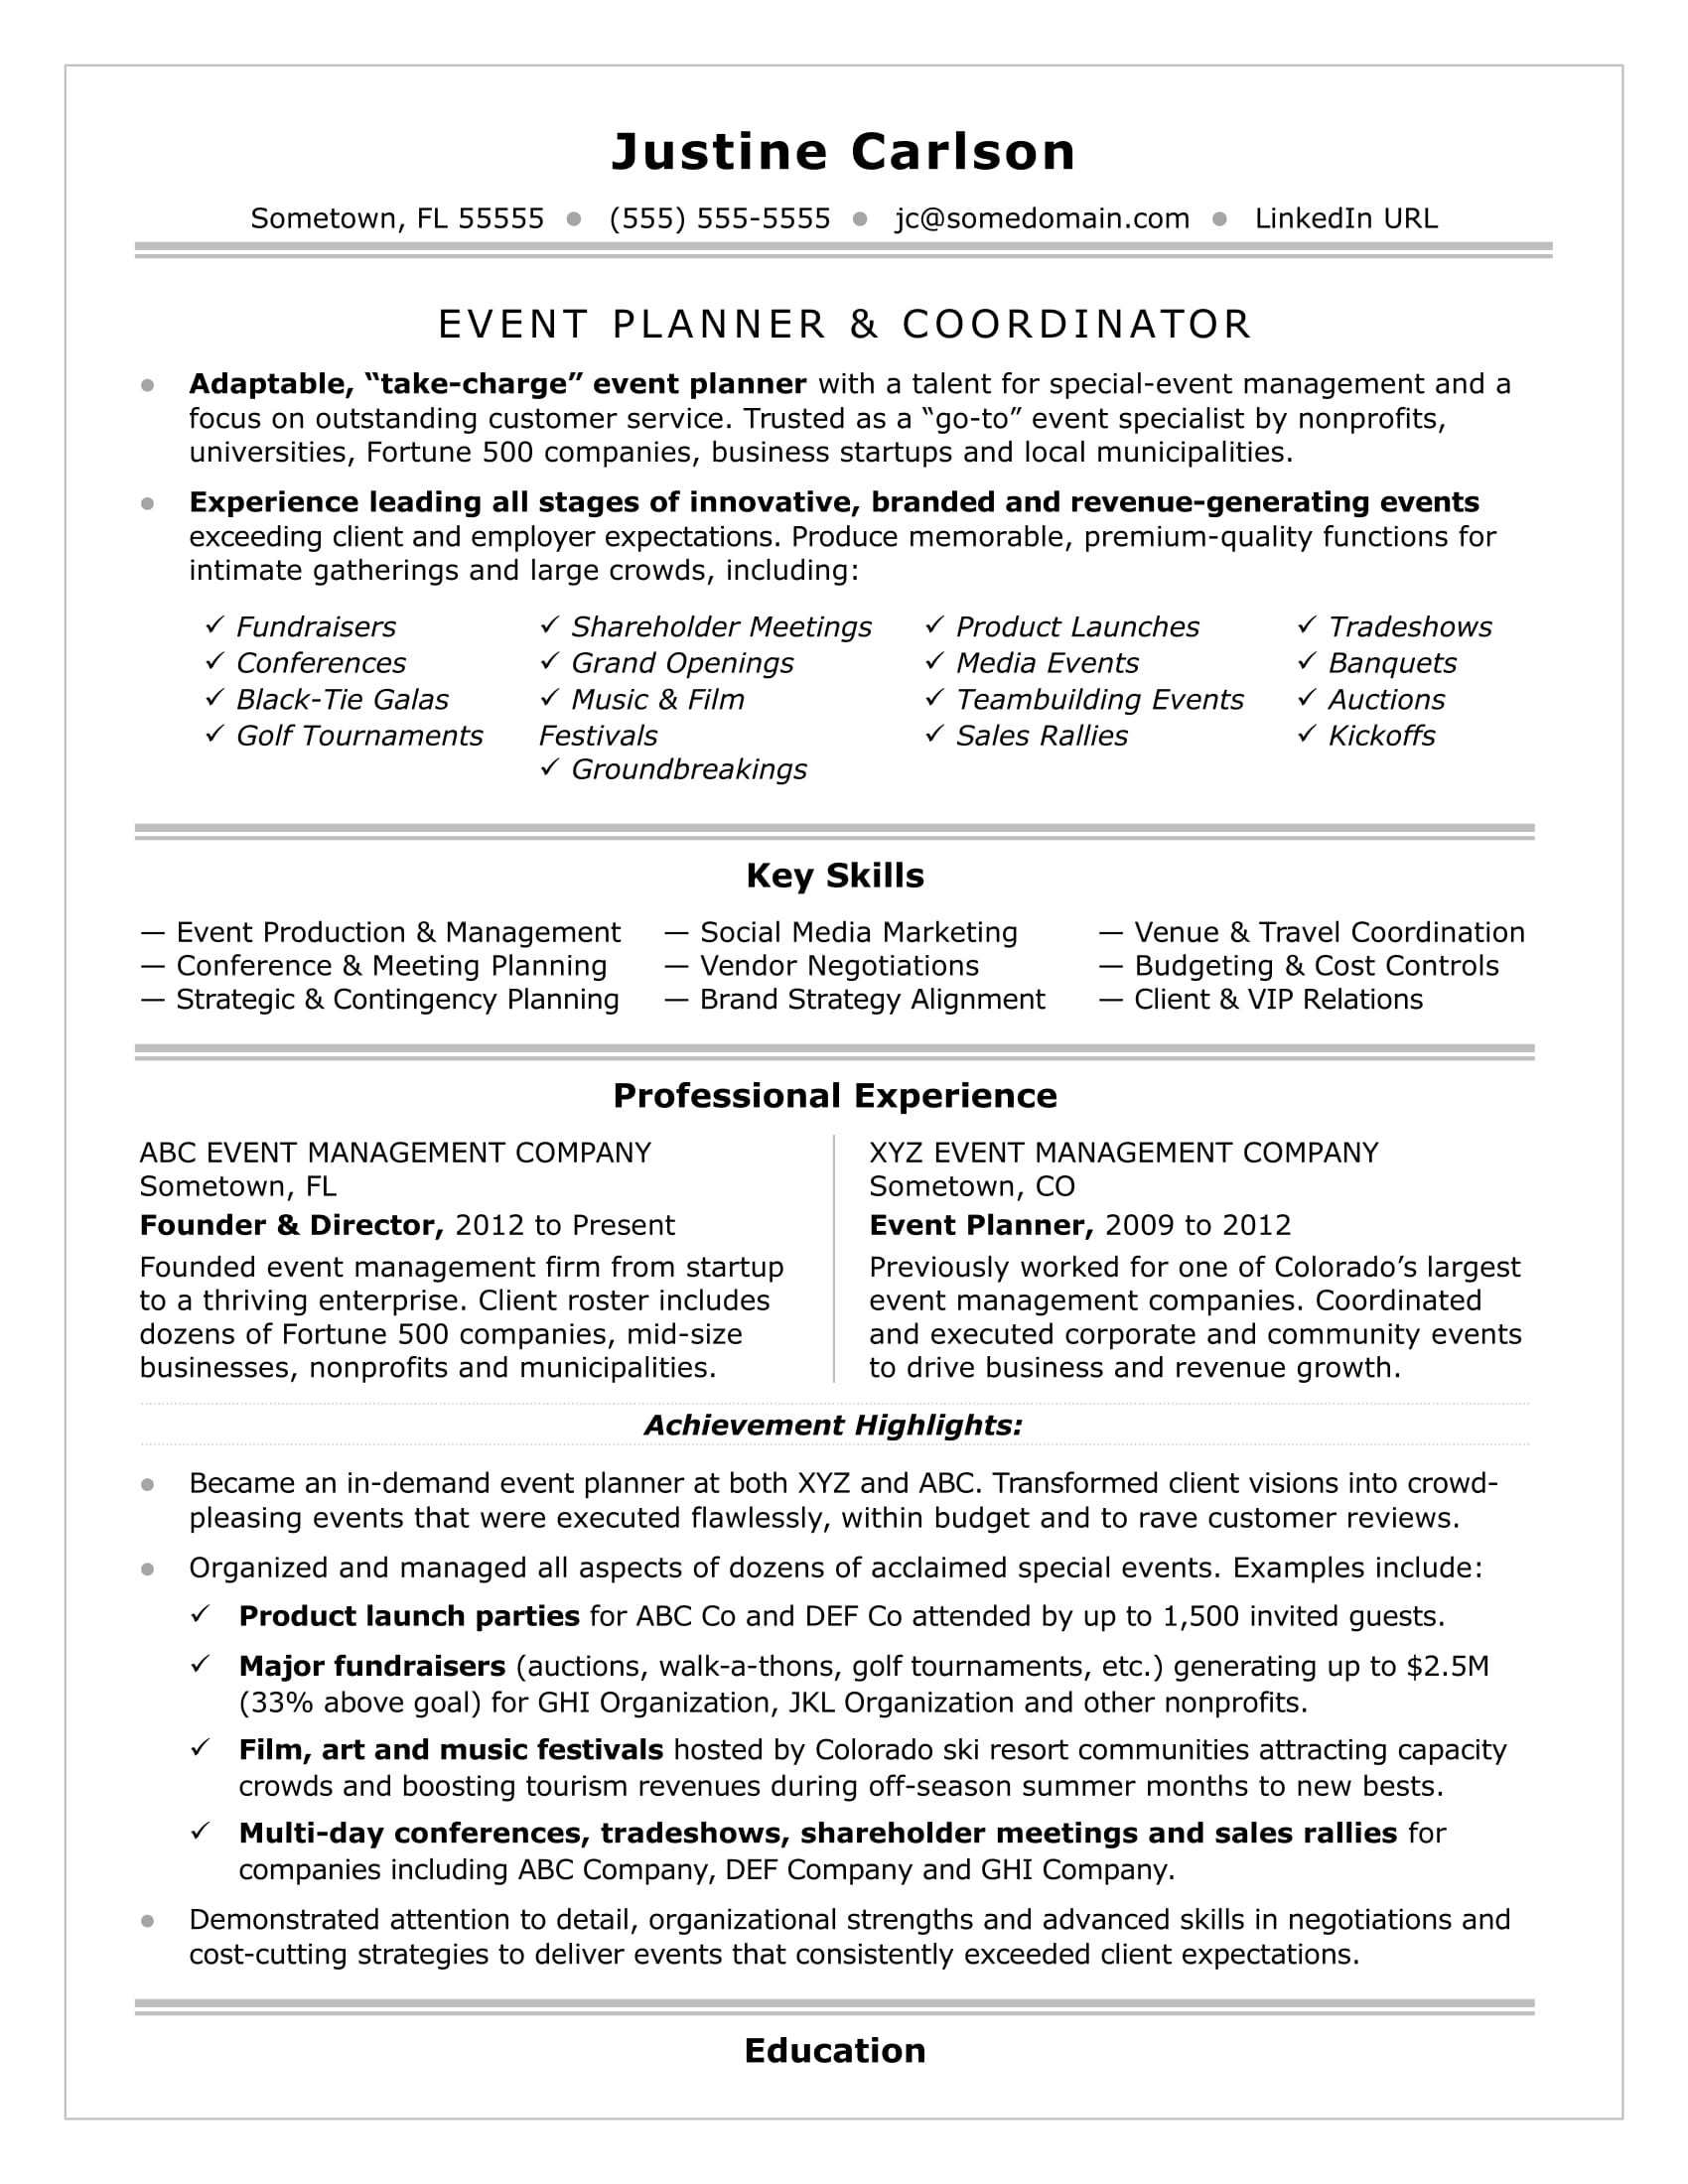 Sample Resume Describe Your Experience Implementing Programs and events event Coordinator Resume Sample Monster.com